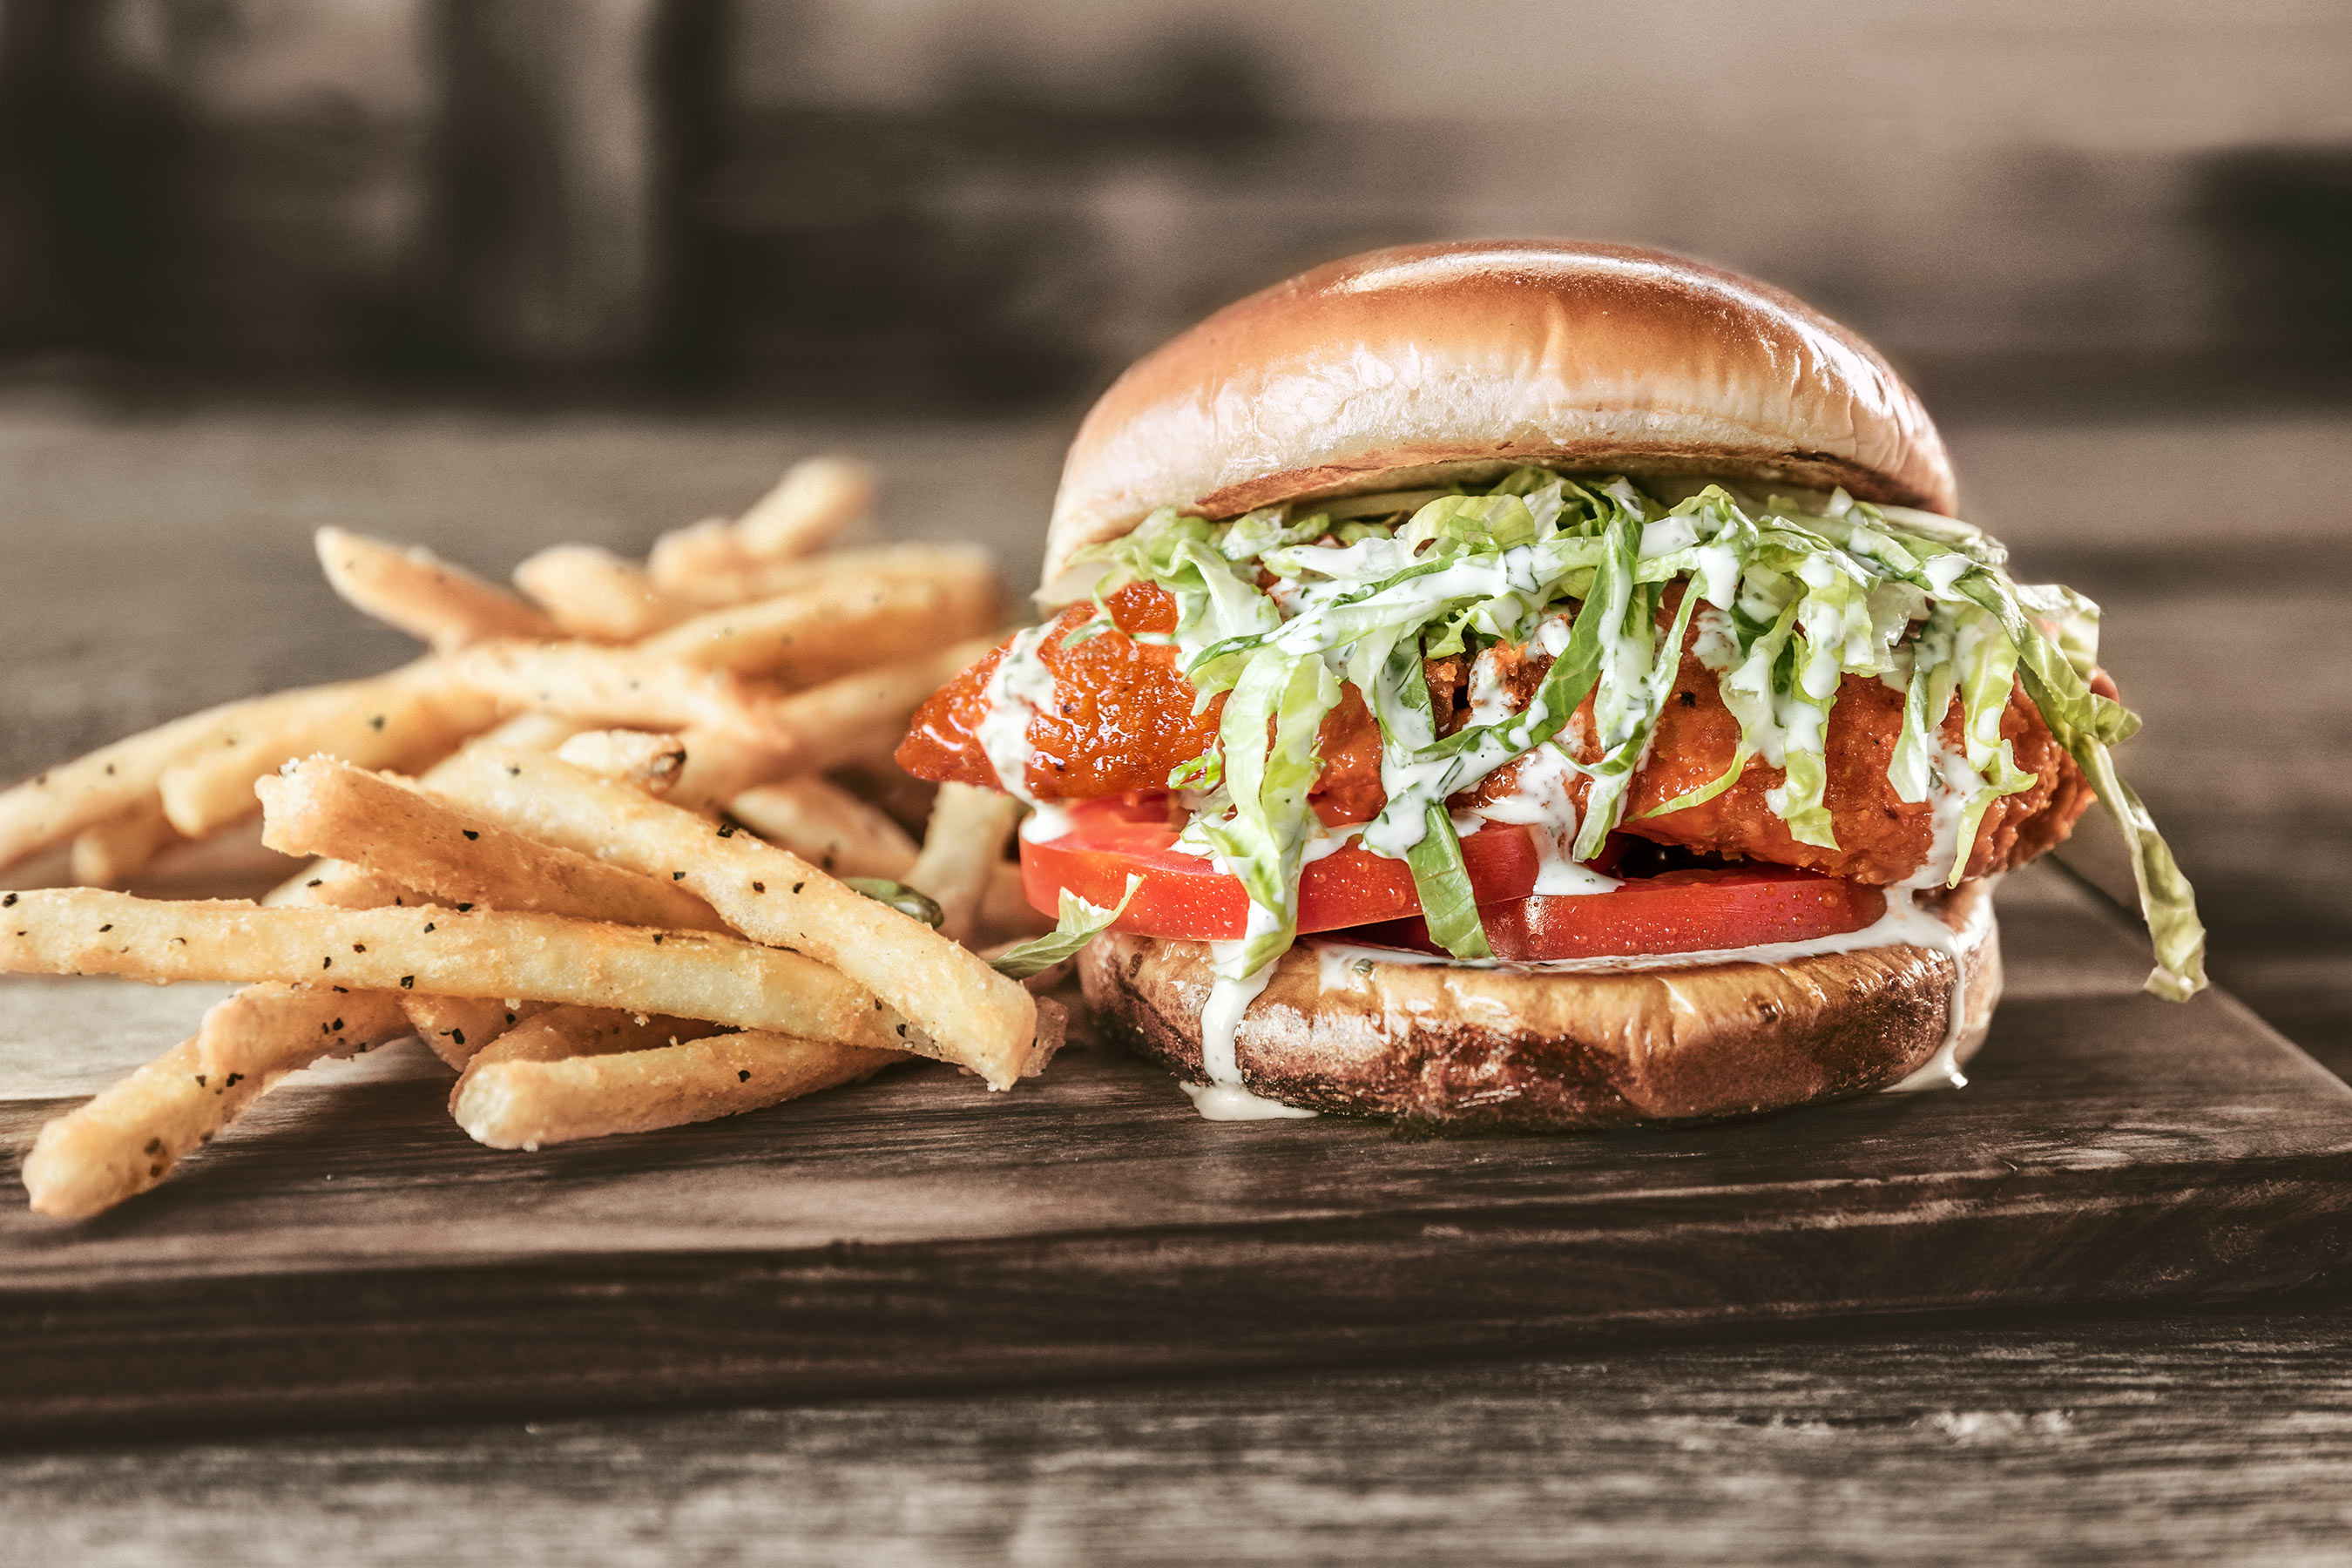 Glanger Photography | Spicy Buffalo Chicken Sandwich and Fries on rustic wood surface